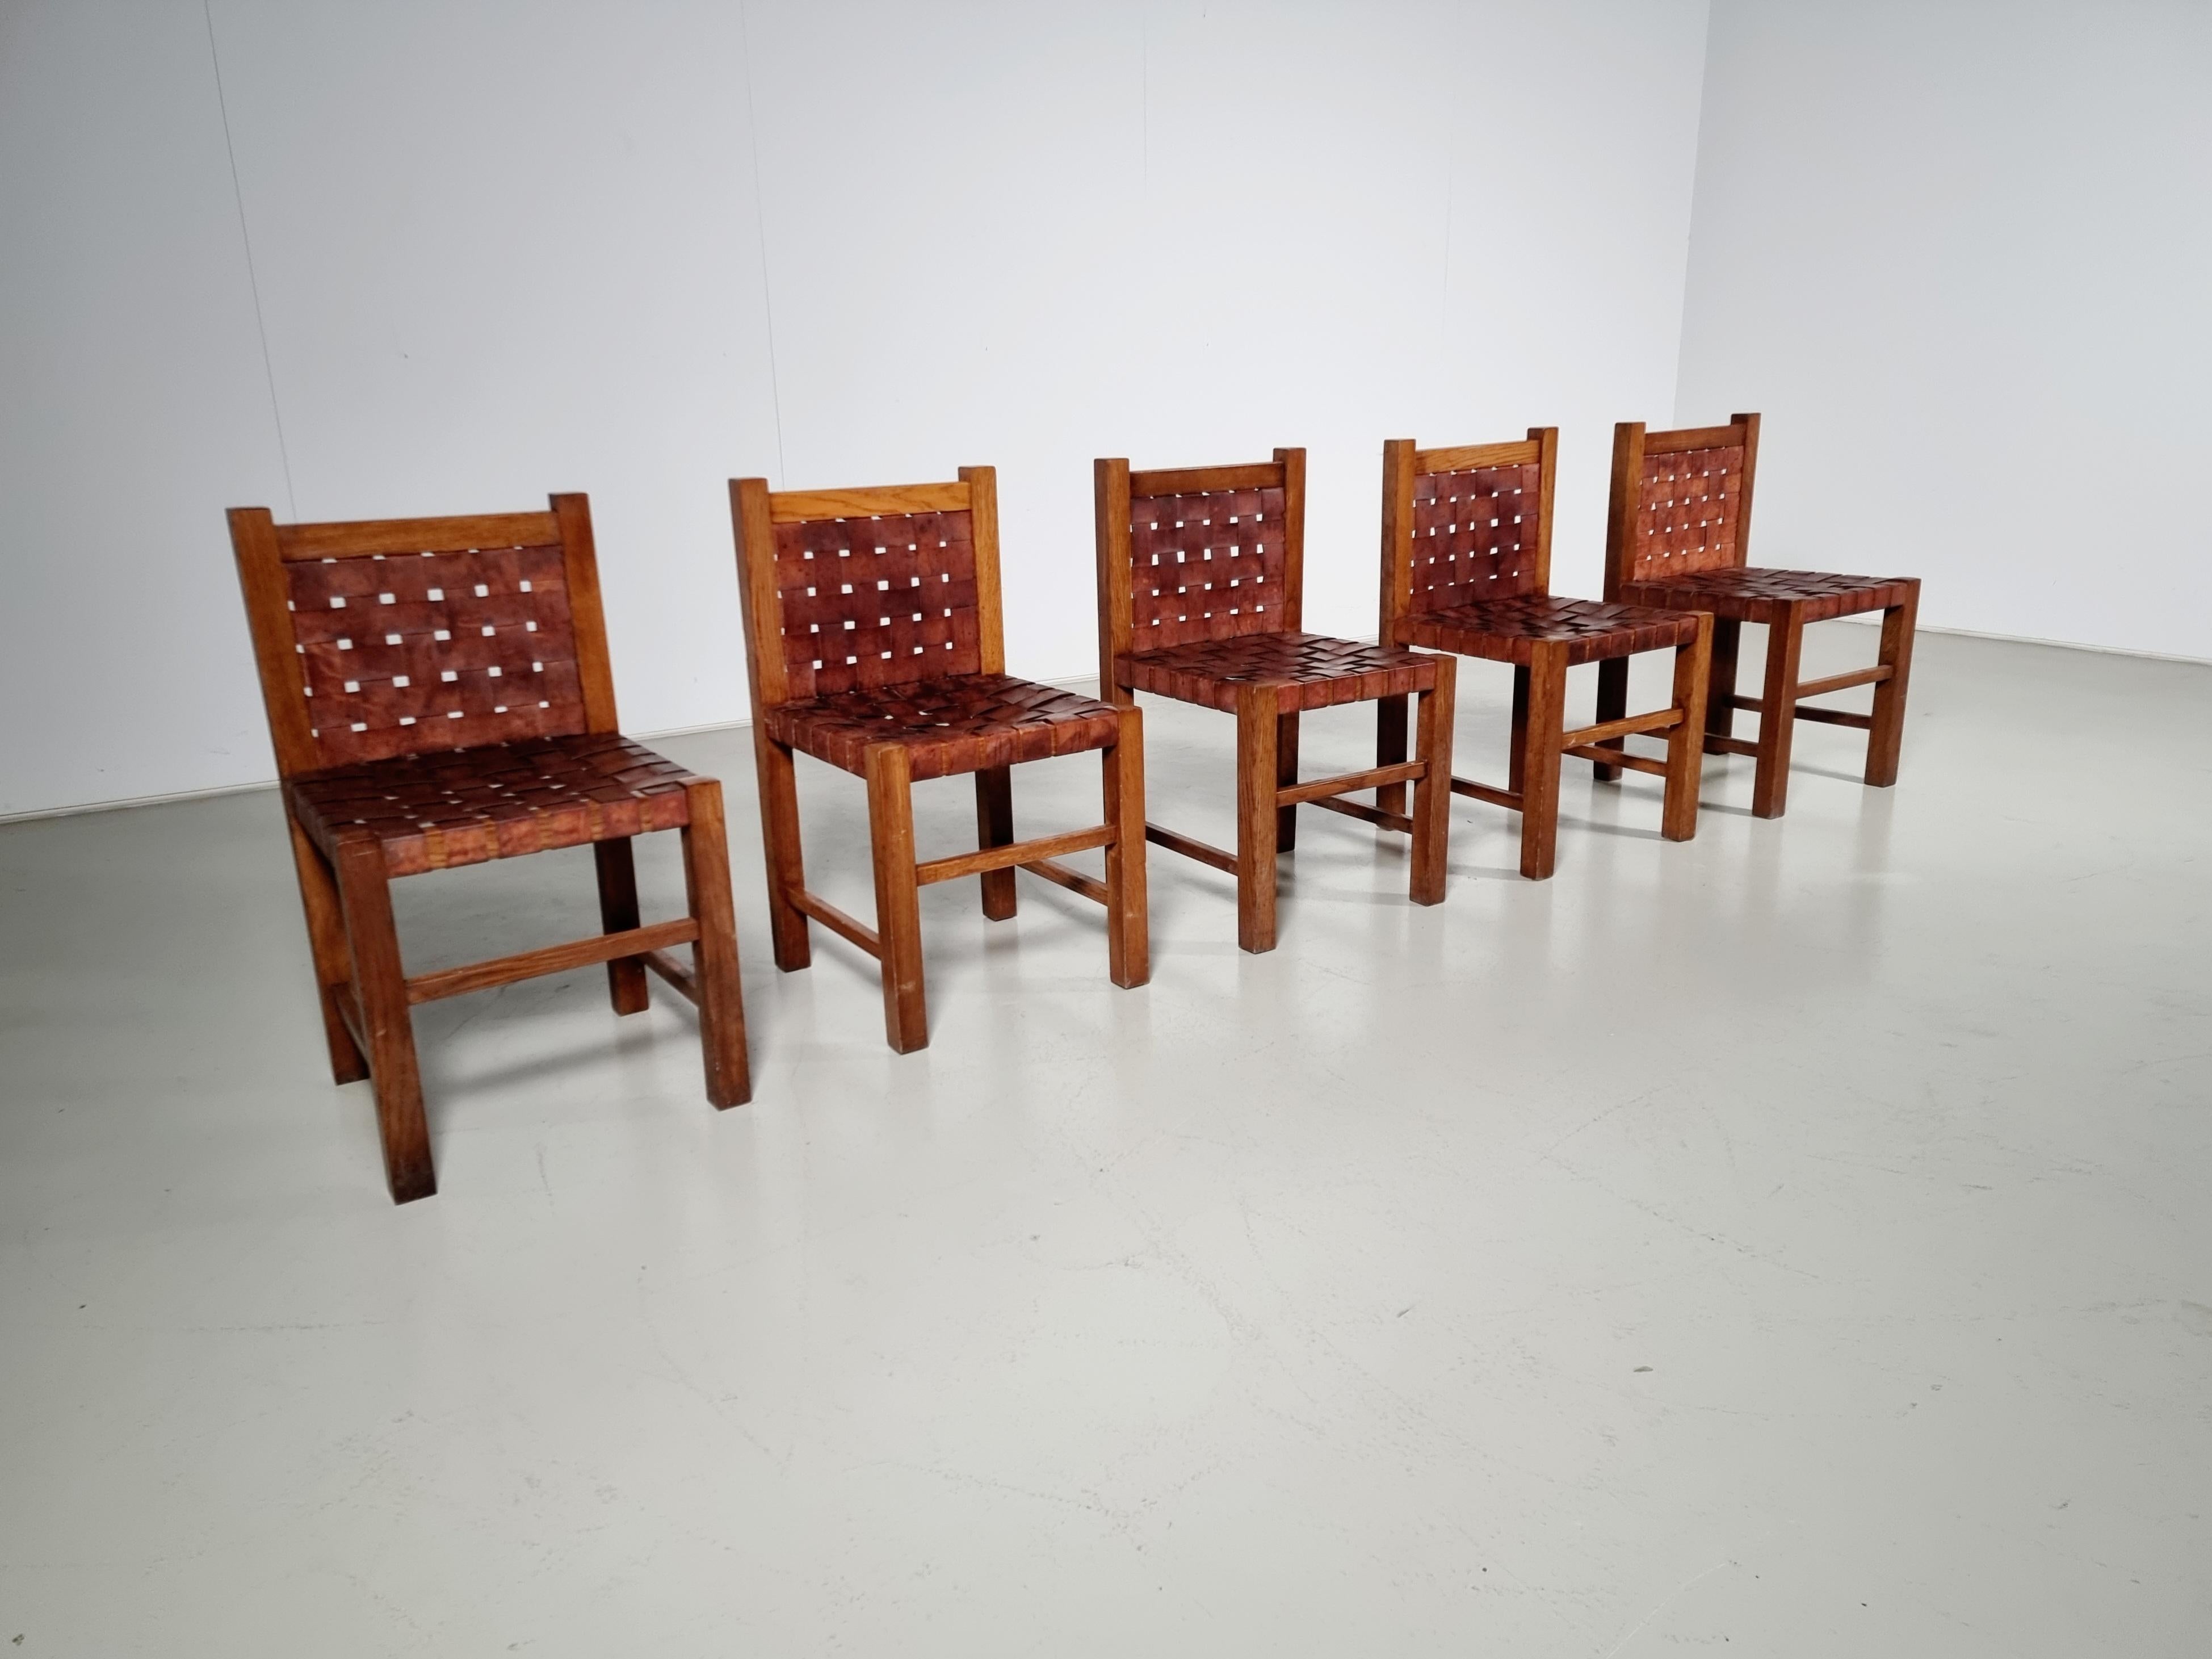 Set of 5 brutalist solid oak dining chairs from the 1970s. Bulky chairs with amazing seating comfort because of the woven leather seats and backs. 

Defined by clean, smooth lines, and excellent joinery, each of these dining chairs was created by